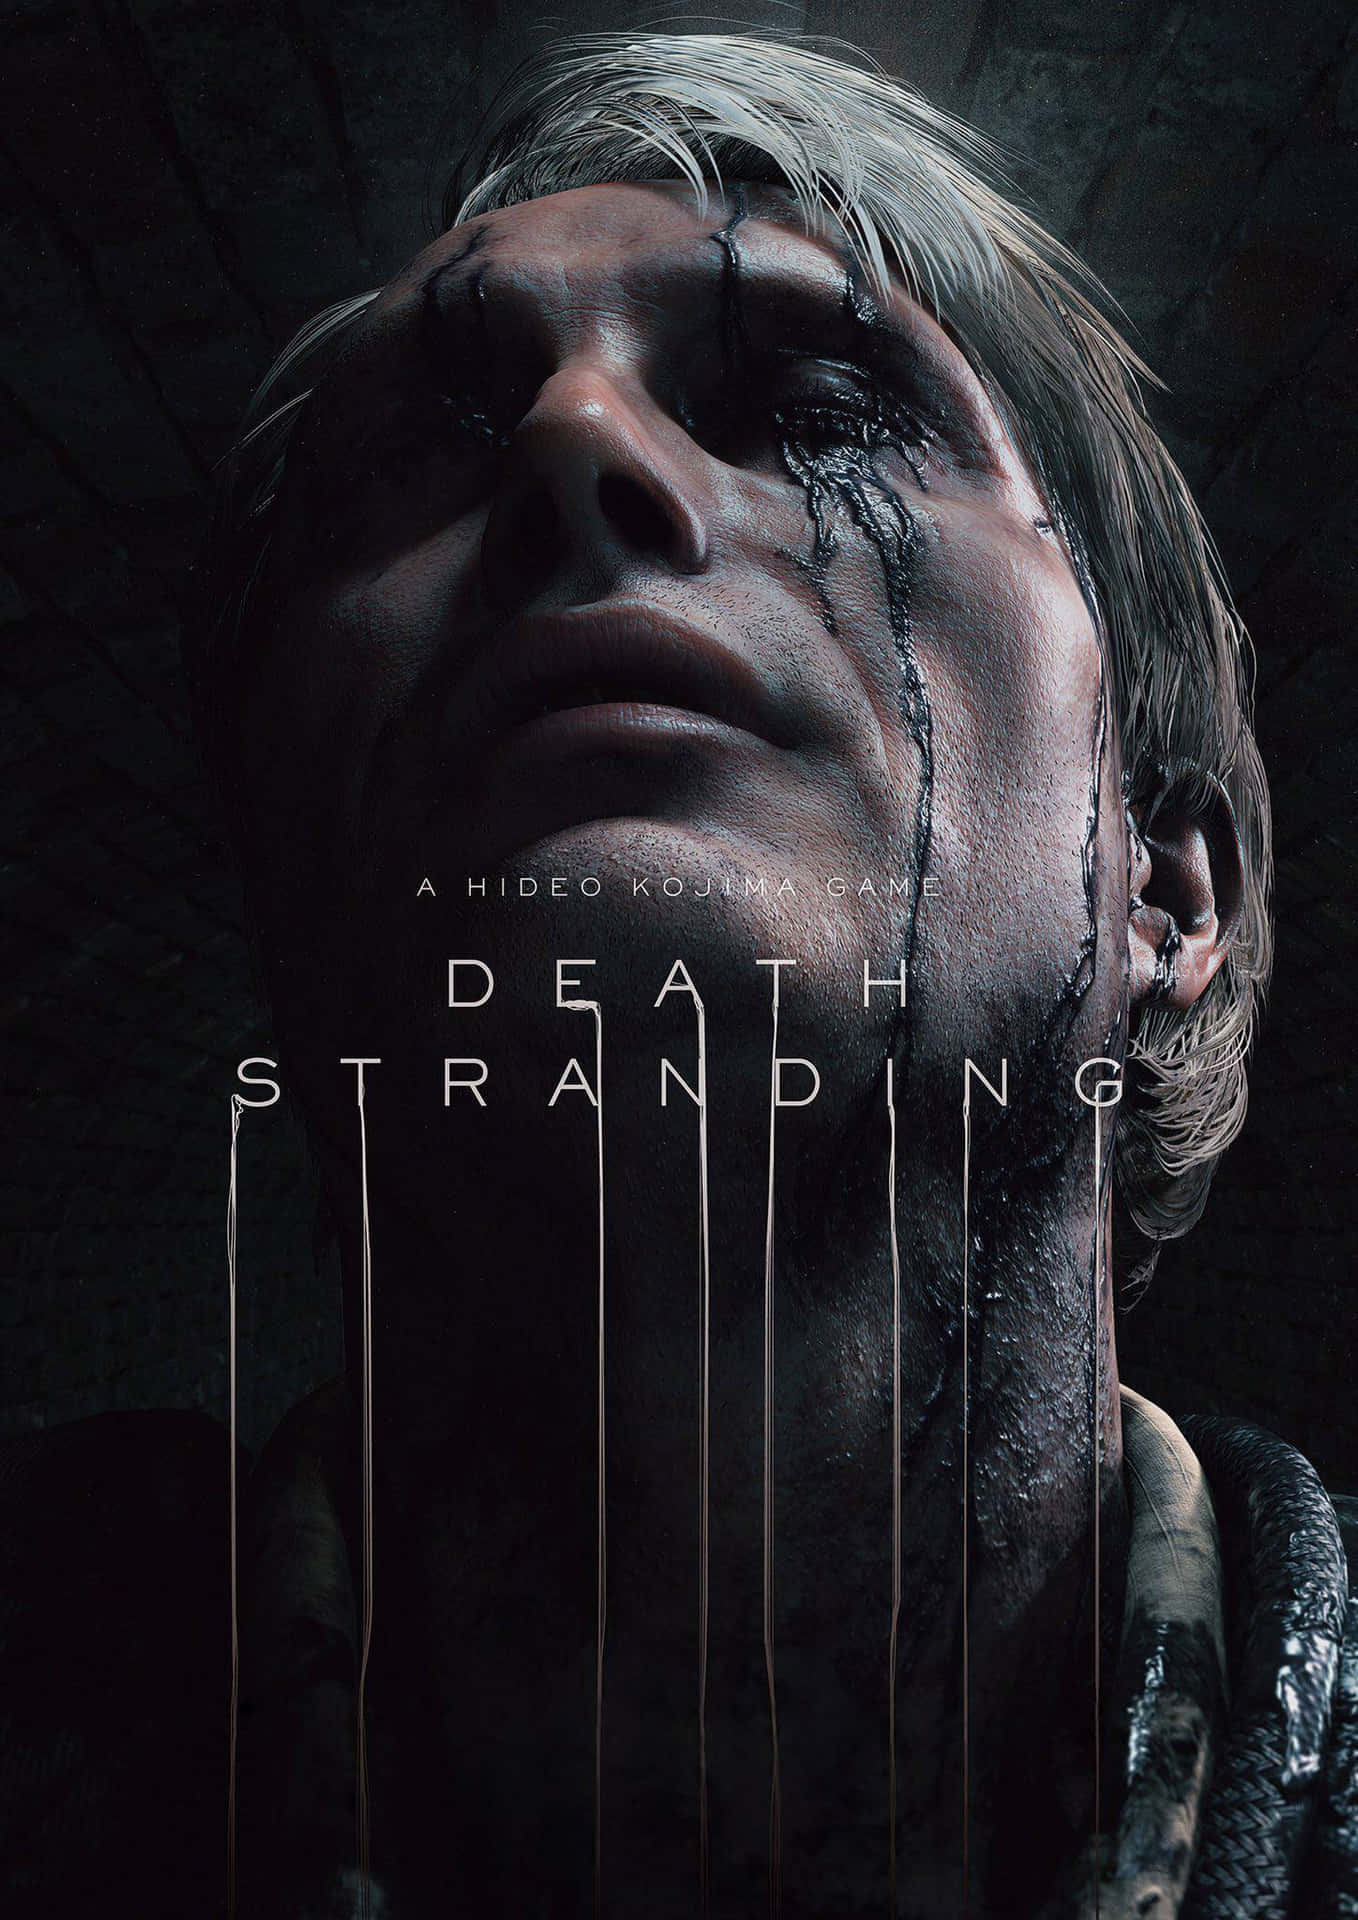 Experience the world of Death Stranding anywhere with the new Mobile Game Wallpaper